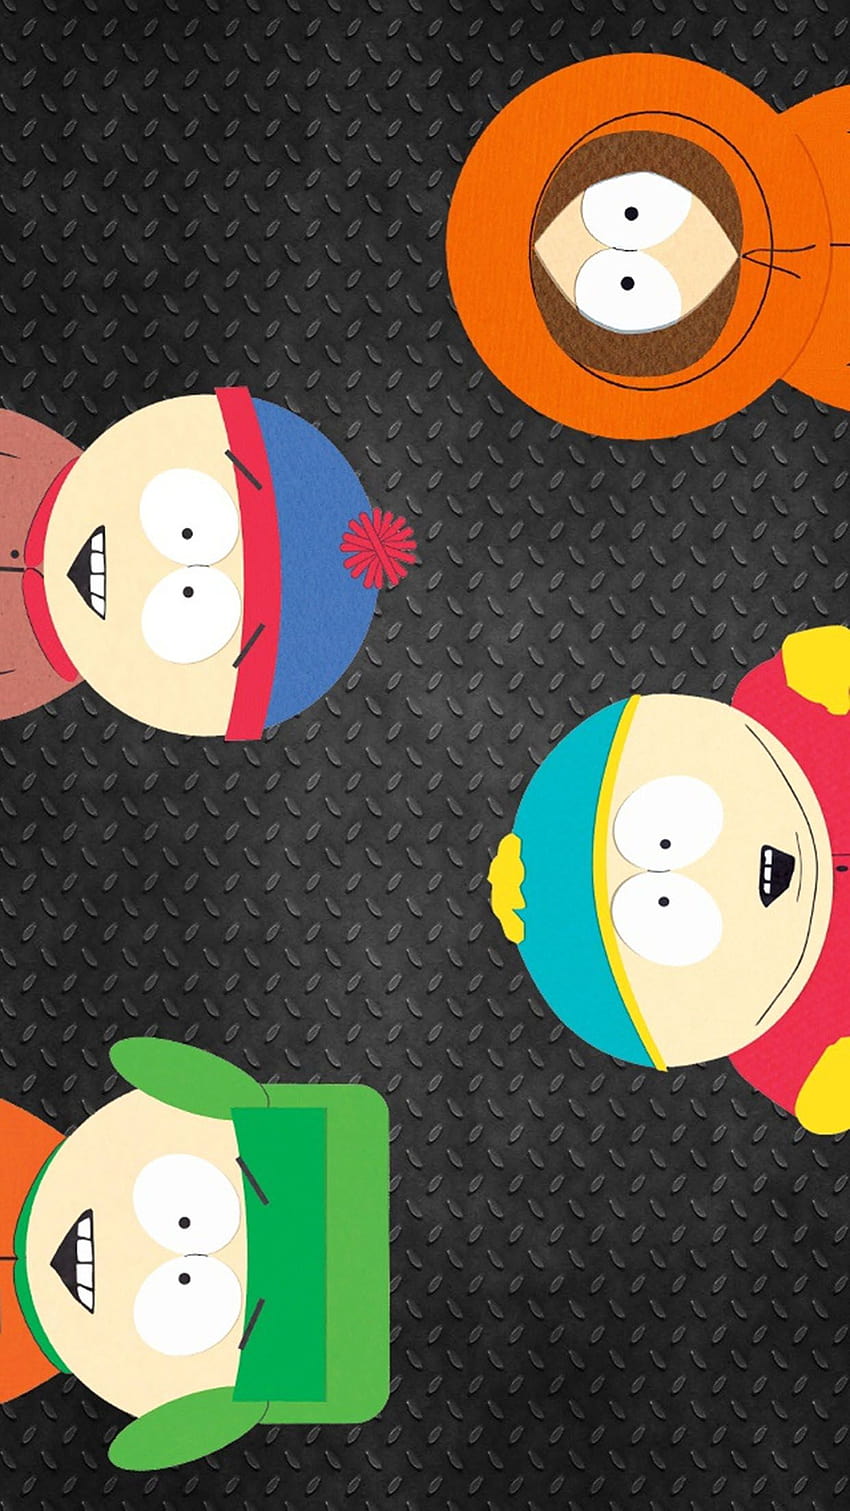 South park family for iPhone 11, Pro Max, X, 8, 7, 6, eric cartman iphone HD phone wallpaper